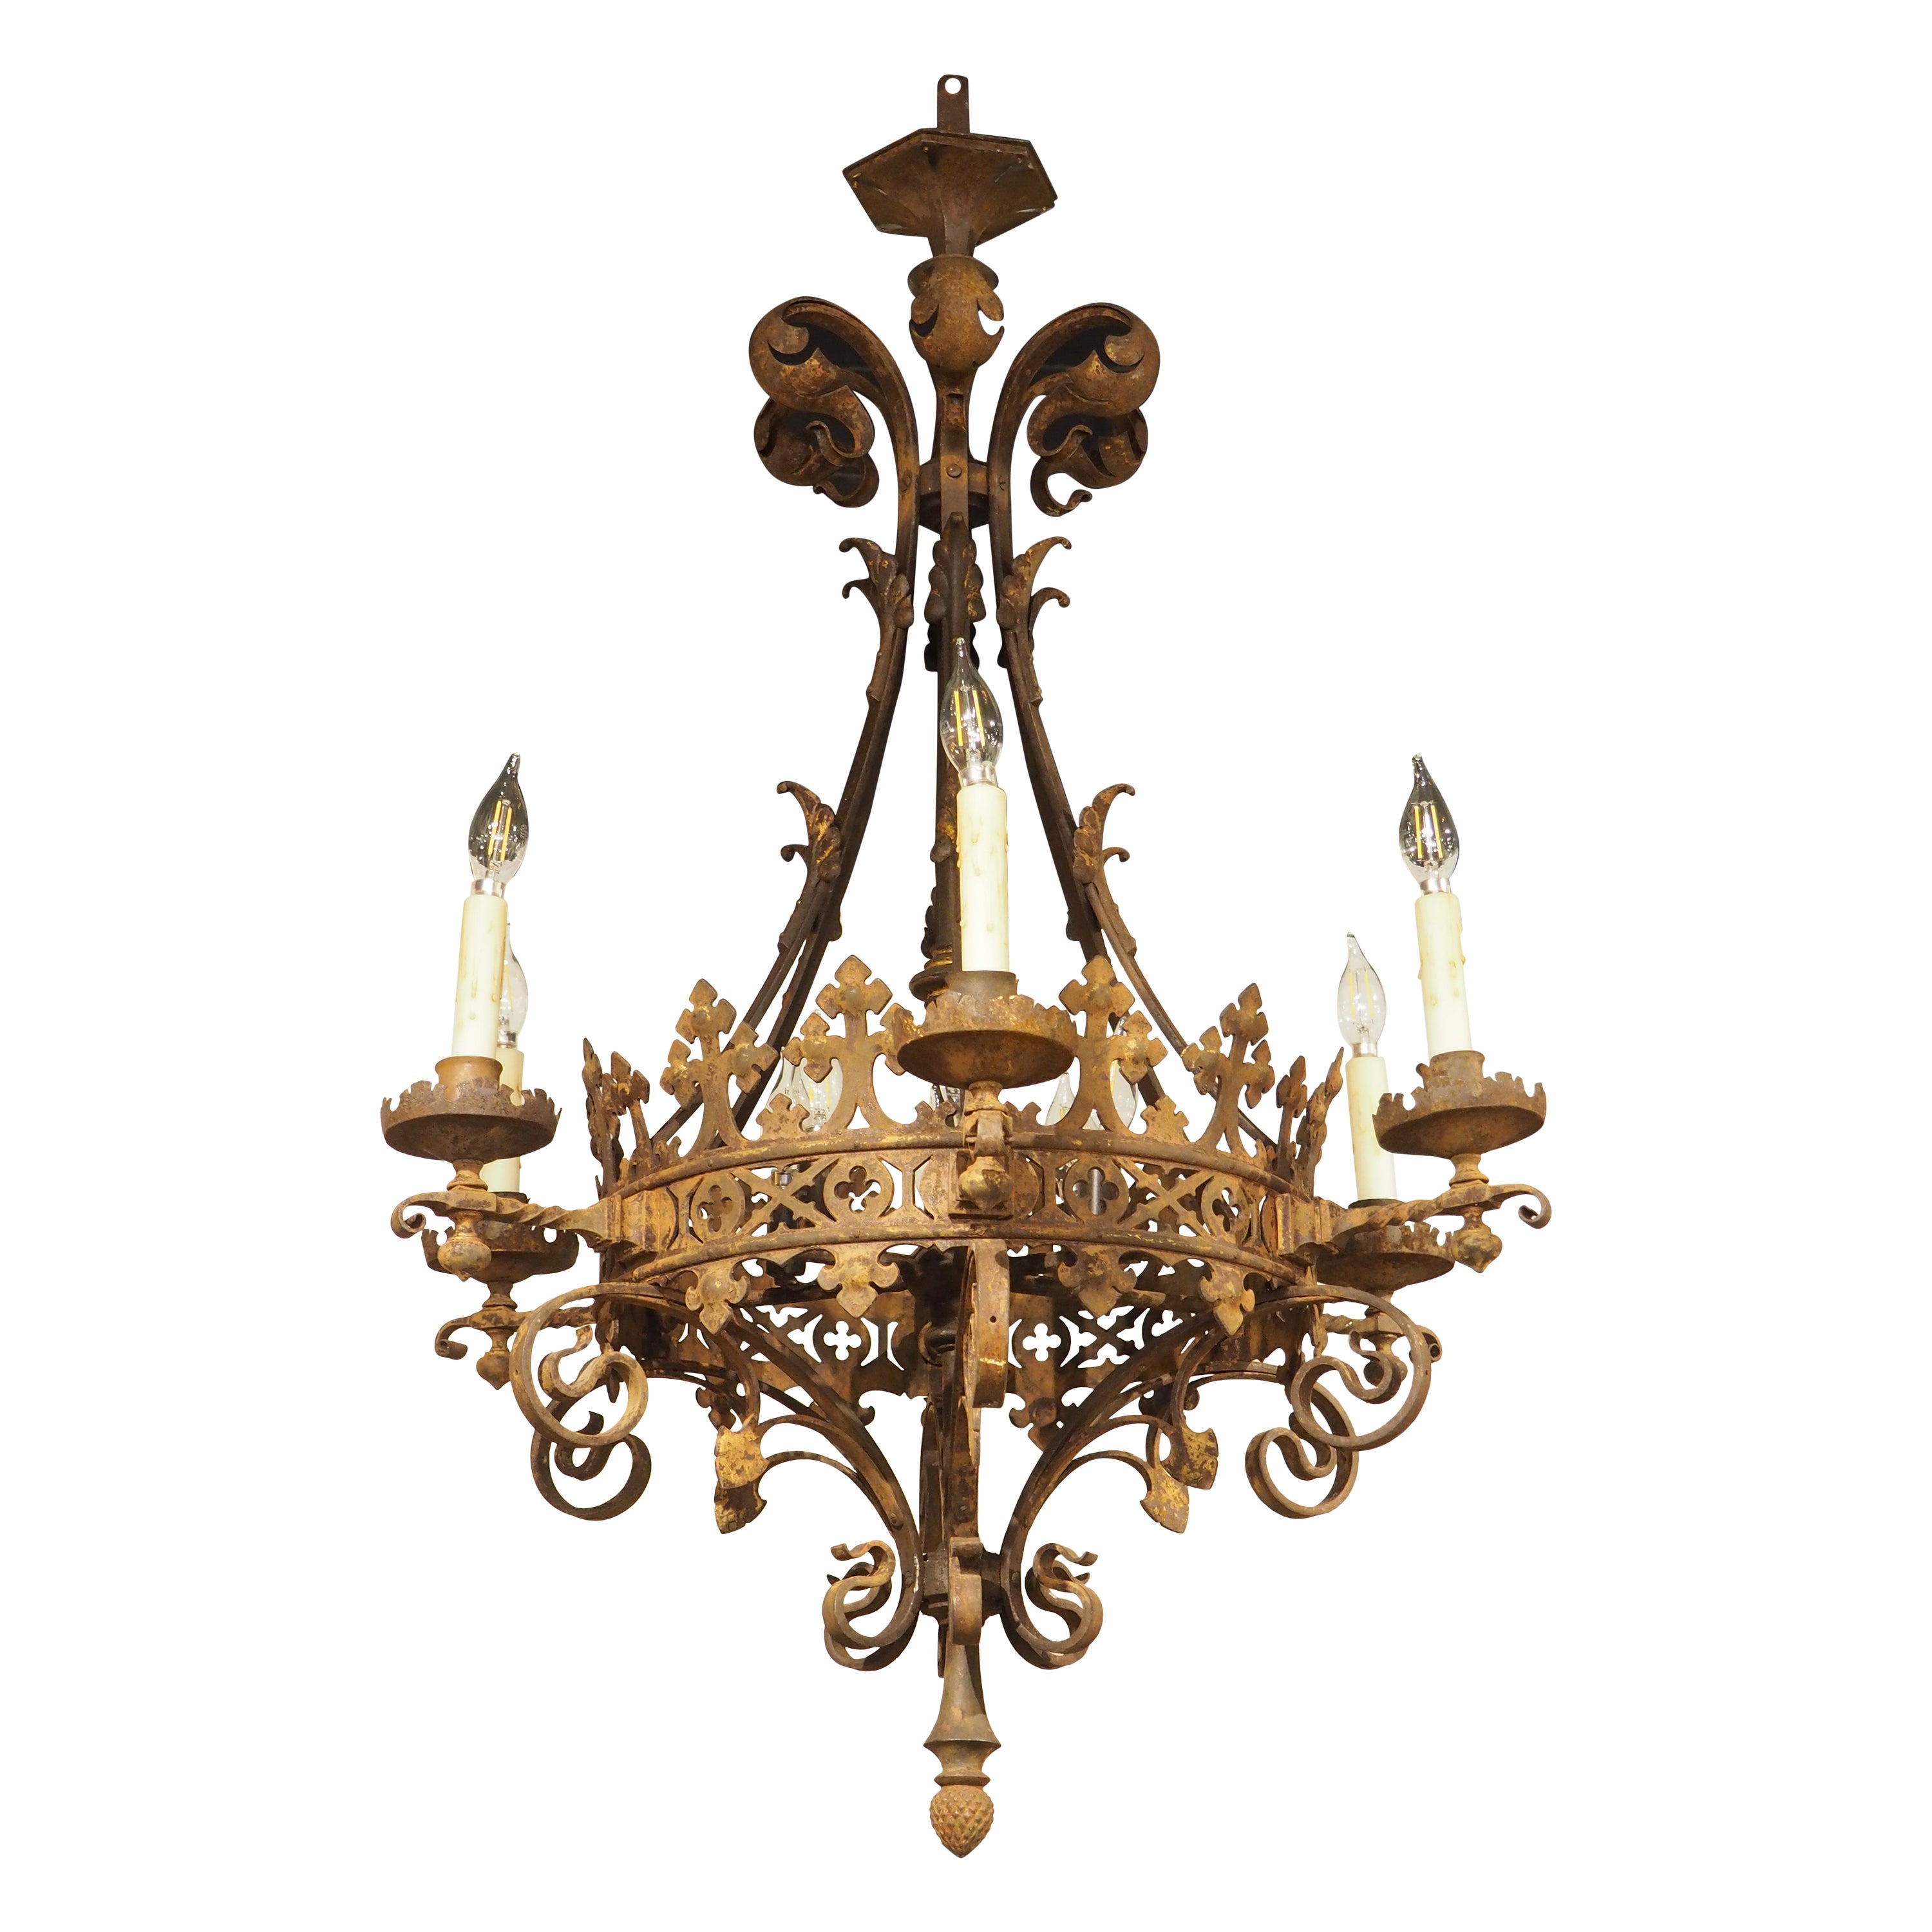 Antique French Wrought Iron Gothic Style Chandelier, Circa 1880